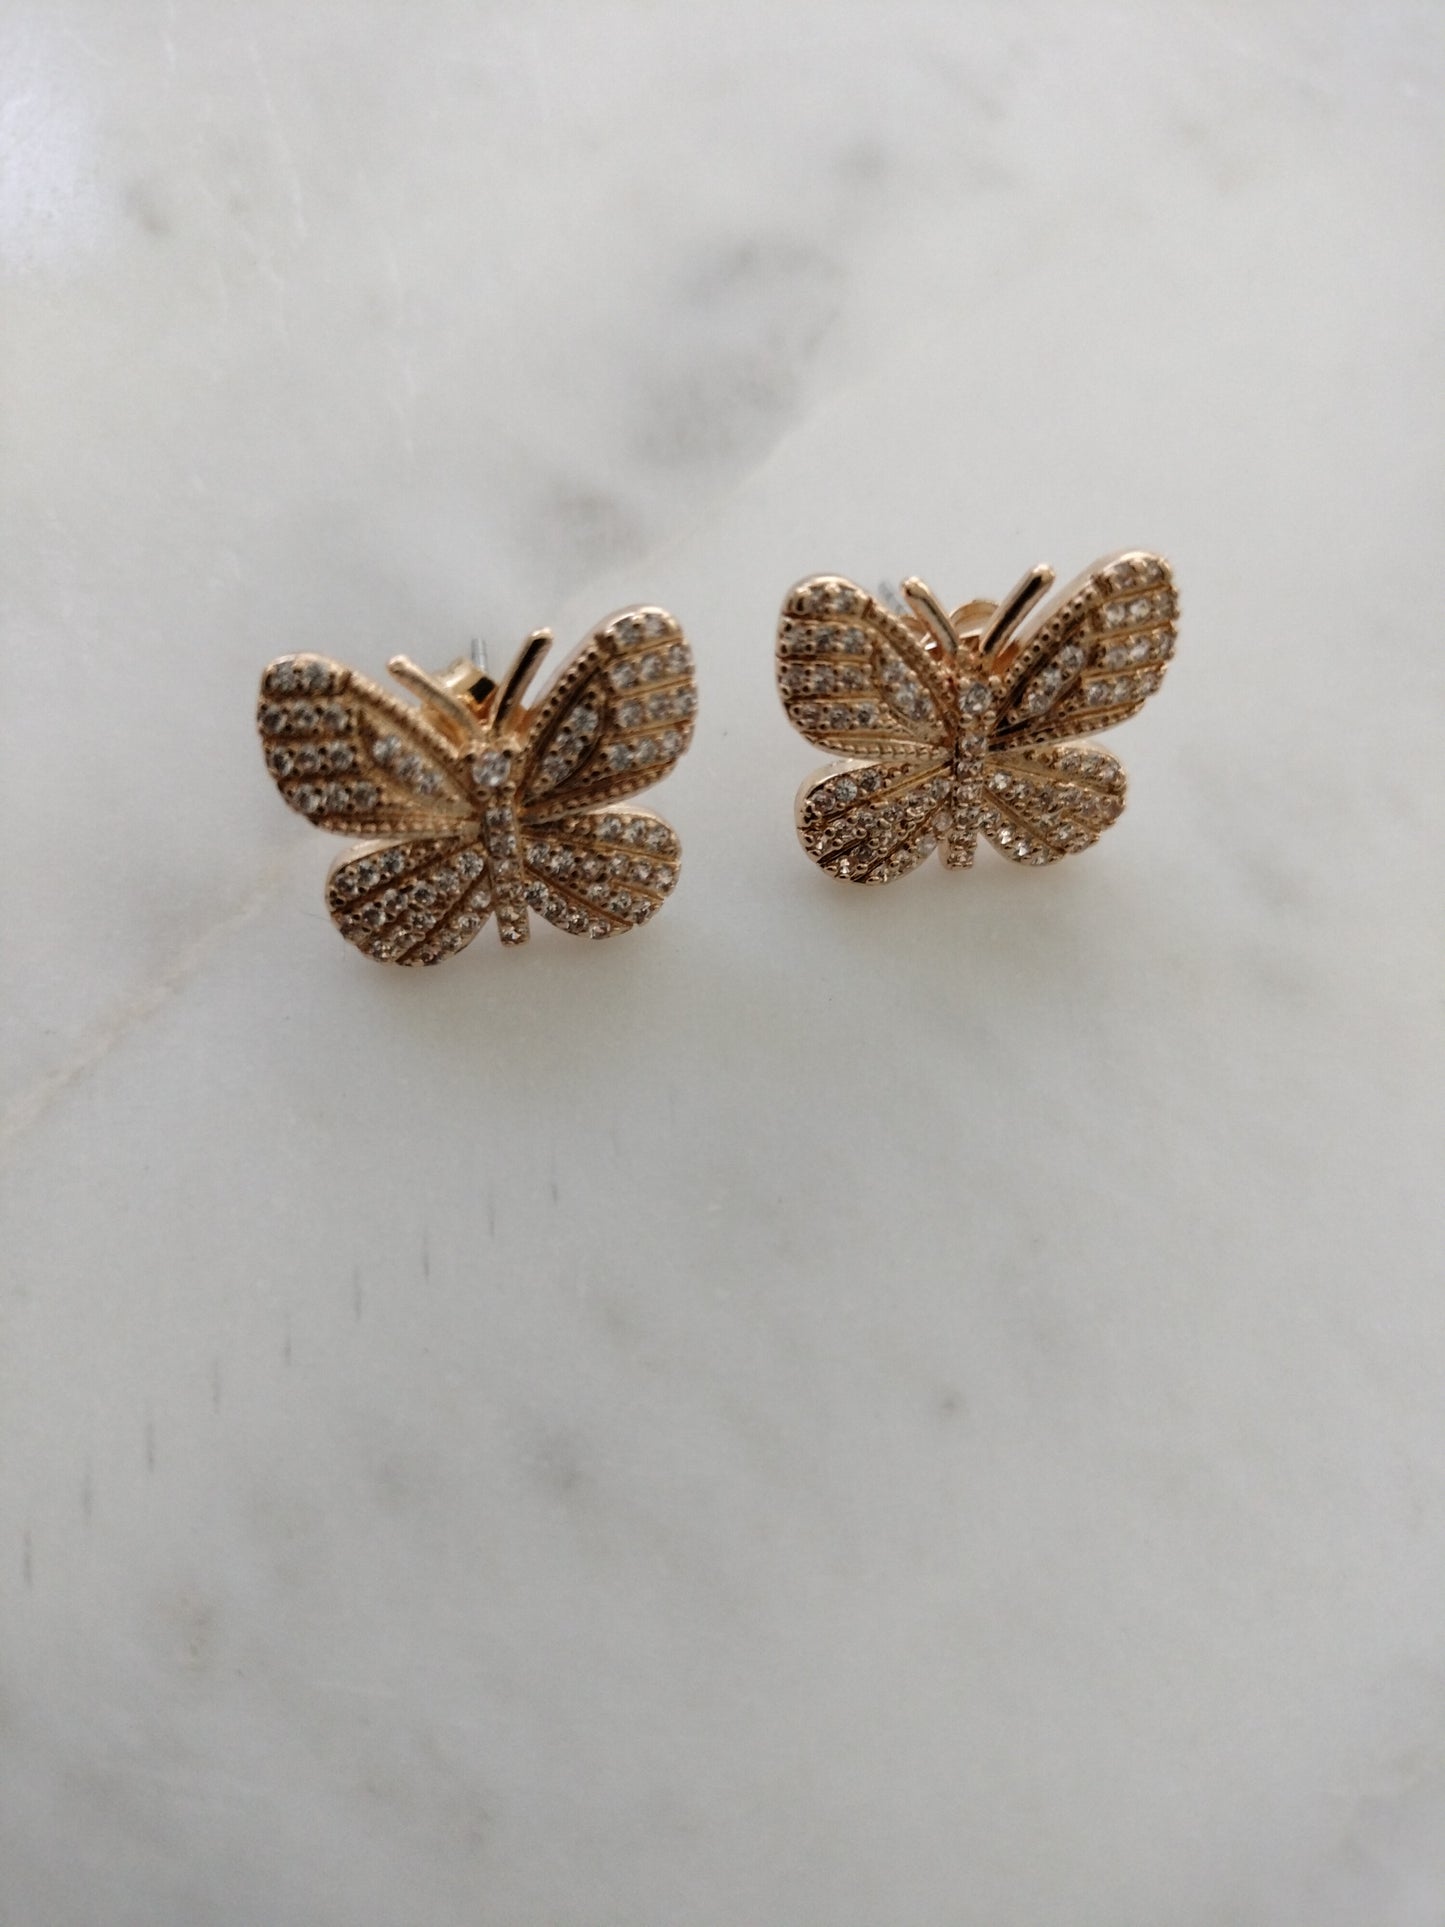 14k gold plated butterfly earrings with cubic zirconia stones